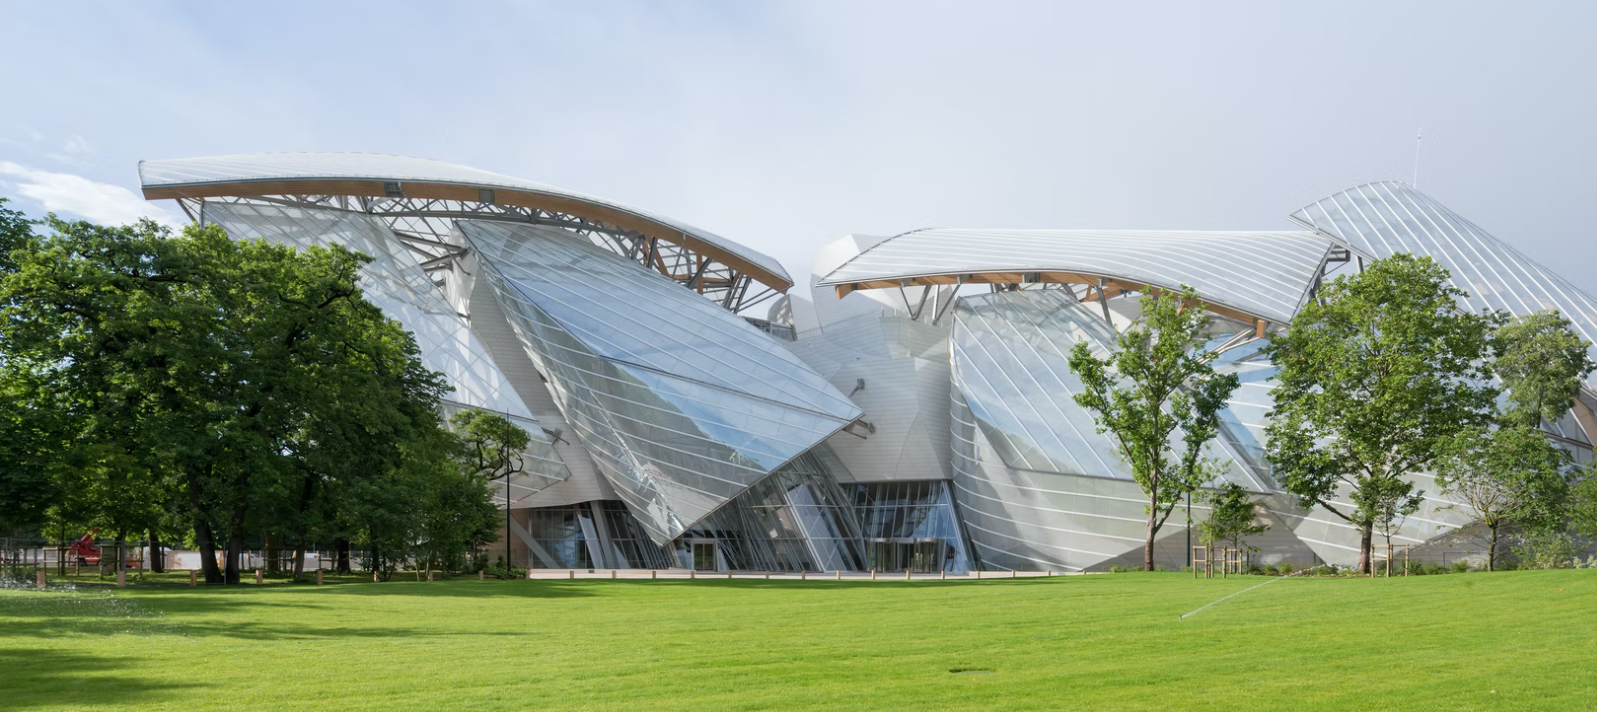 The Fondation Louis Vuitton in Paris / toothpicnations